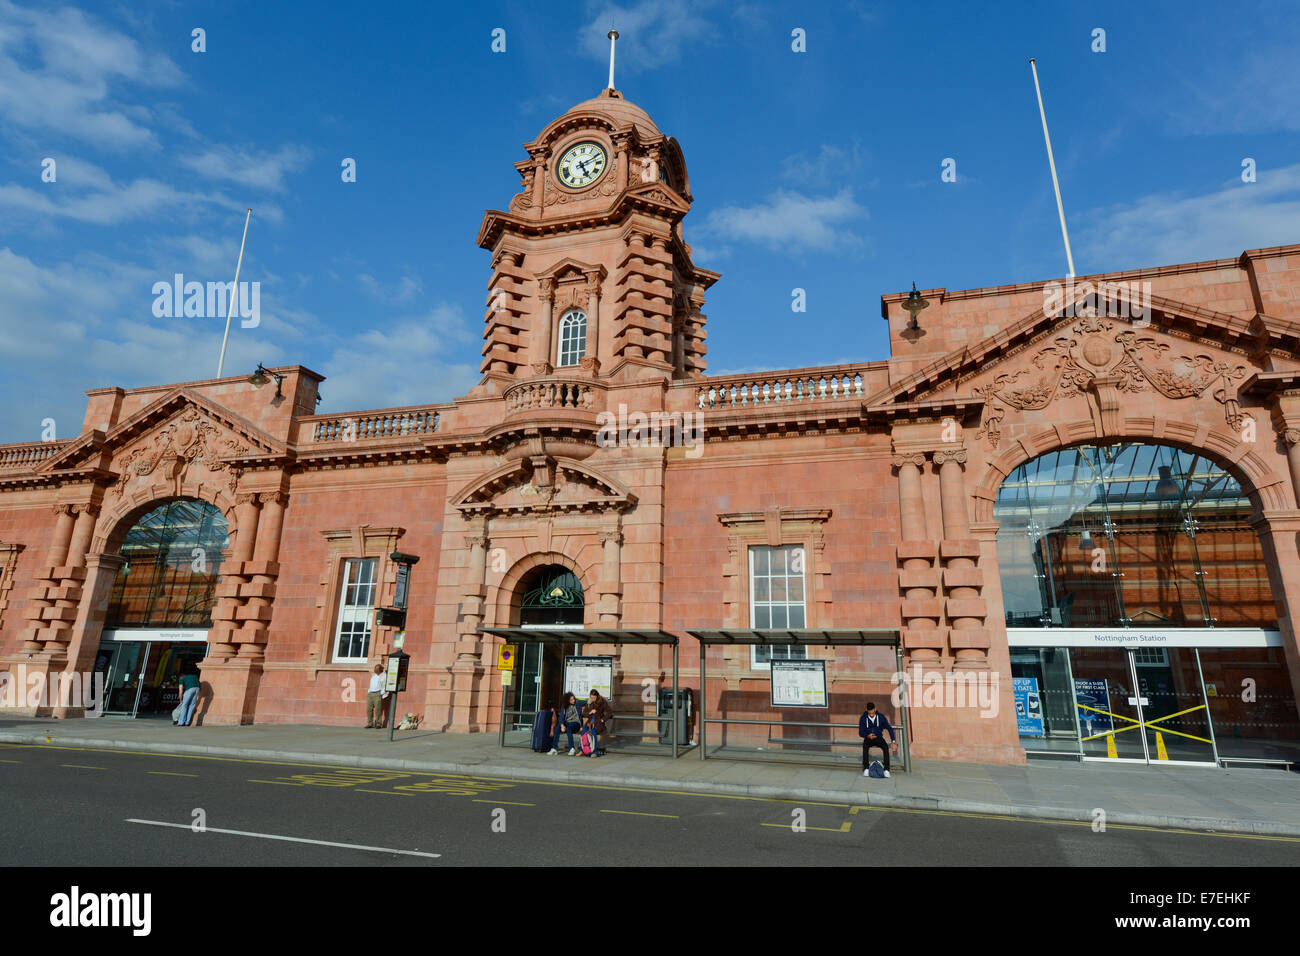 An external view of the entrance to Nottingham train station on a bright sunny day. Stock Photo